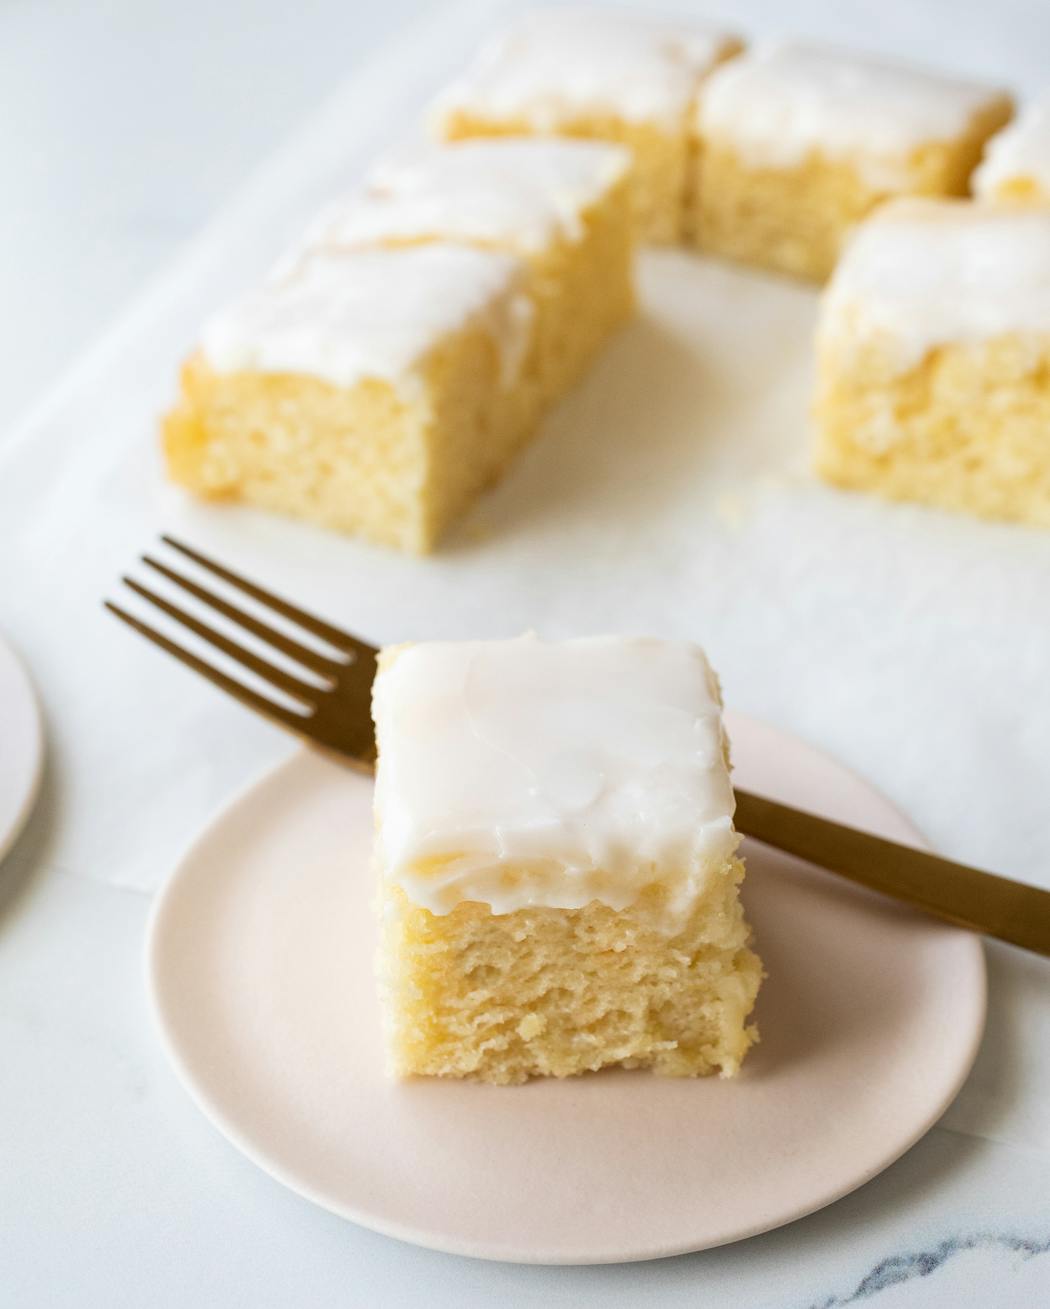 Sarah Kieffer's Lemon Snacking Cake is a burst of flavor as we wait to officially welcome spring. Credit: Sarah Kieffer, Special to the Star Tribune. *Use only with Sarah Kieffer column*